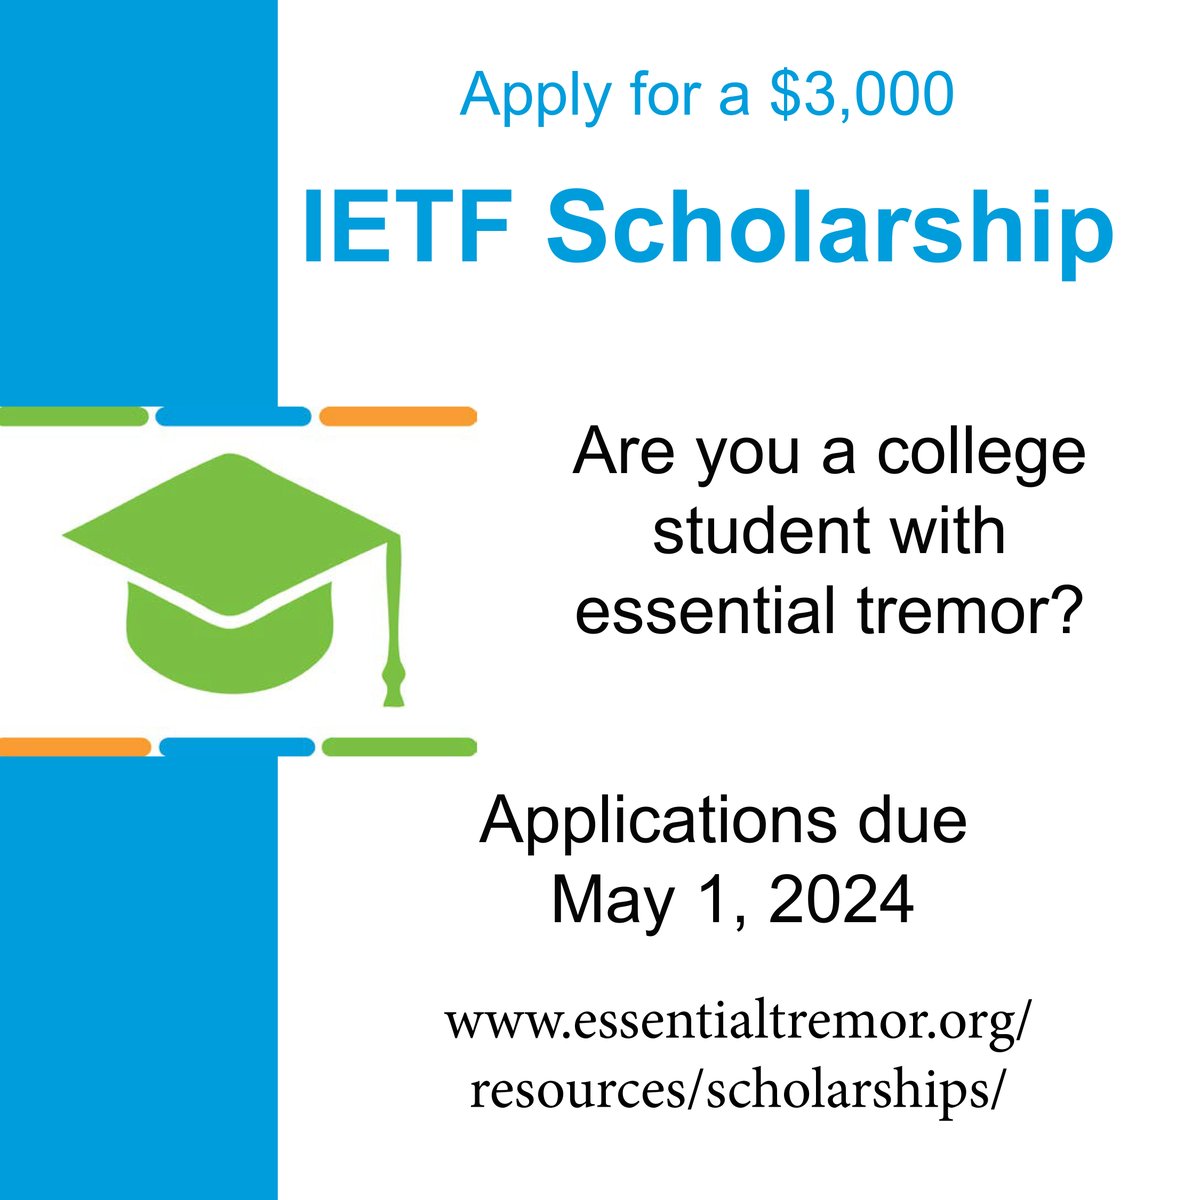 If you are a college student with essential tremor, be sure to get your application in for one of our $3,000 scholarships. May 1 is the deadline to apply. Students in trade schools and graduate and doctoral programs also qualify. Learn more on our website. bit.ly/3gxBMZ3